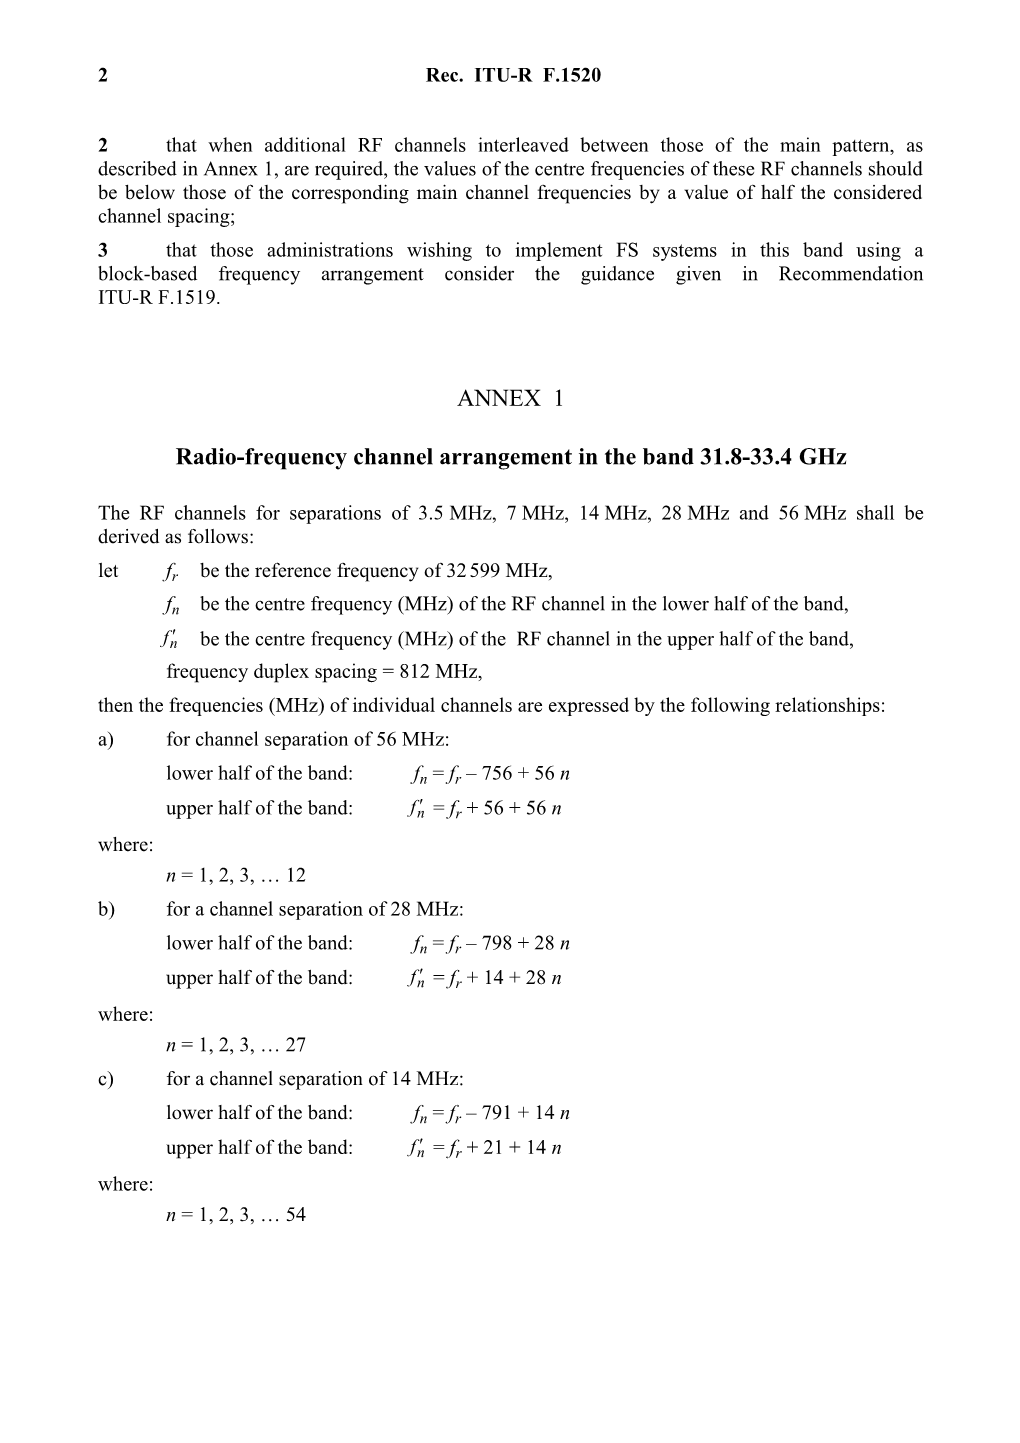 RECOMMENDATION ITU-R F.1520 - Radio-Frequency Channel Arrangements for Systems